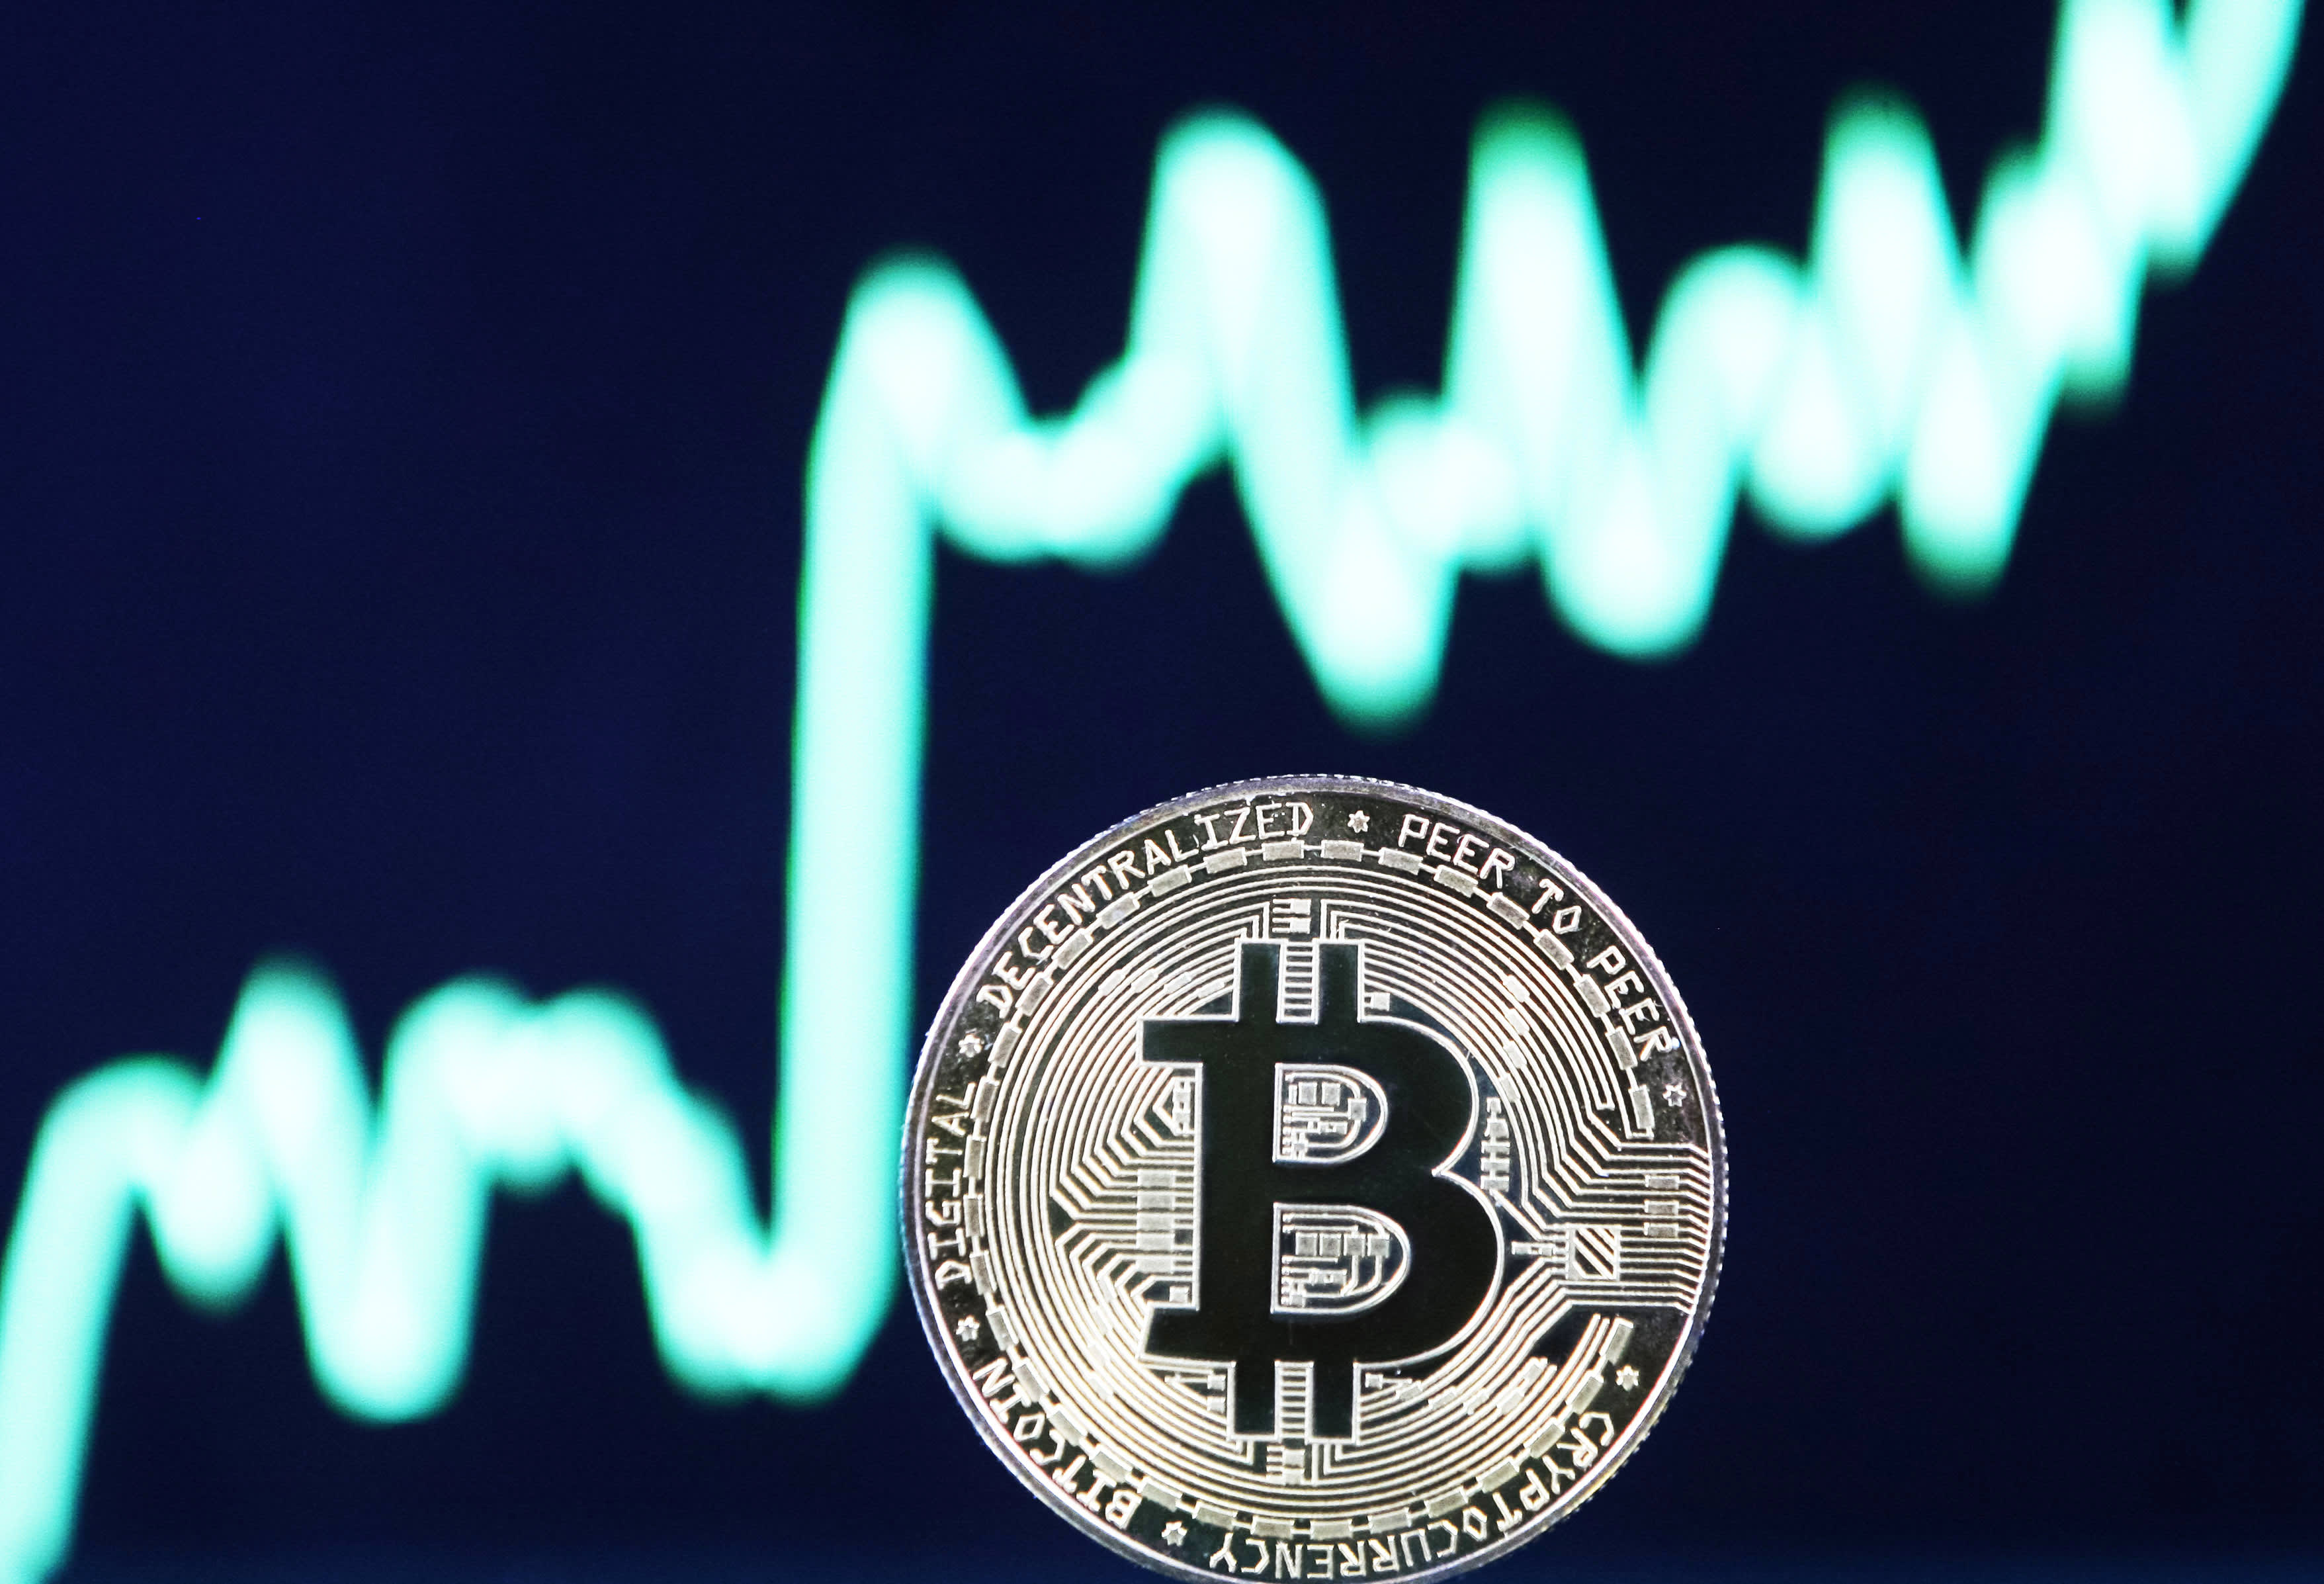 Bitcoin (BTC) price could hit $100,000 within a year: Crypto CEO